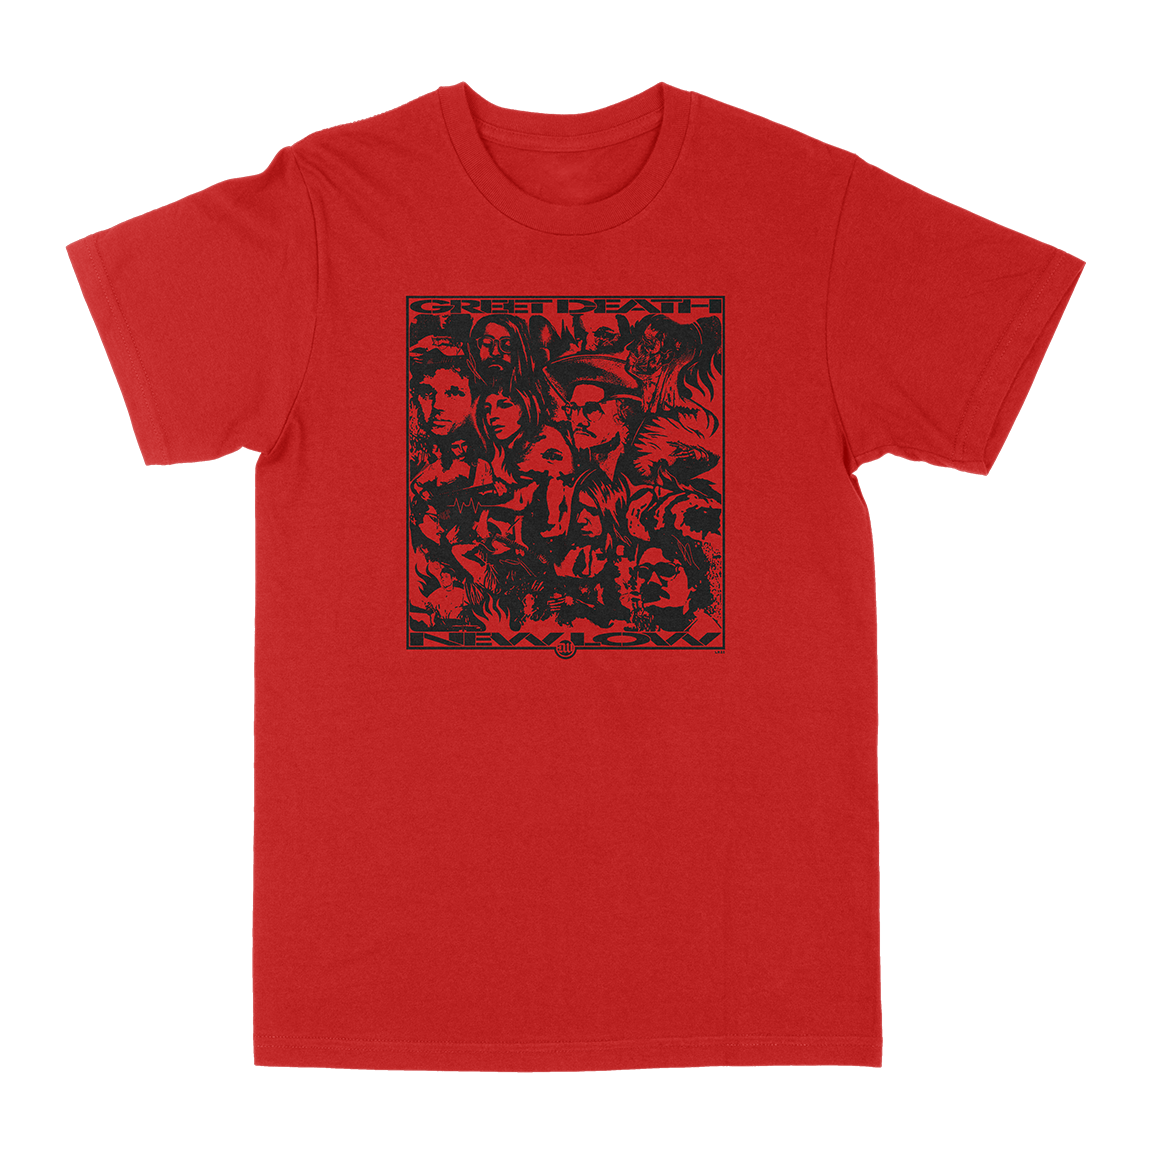 "New Low" Red T-Shirt